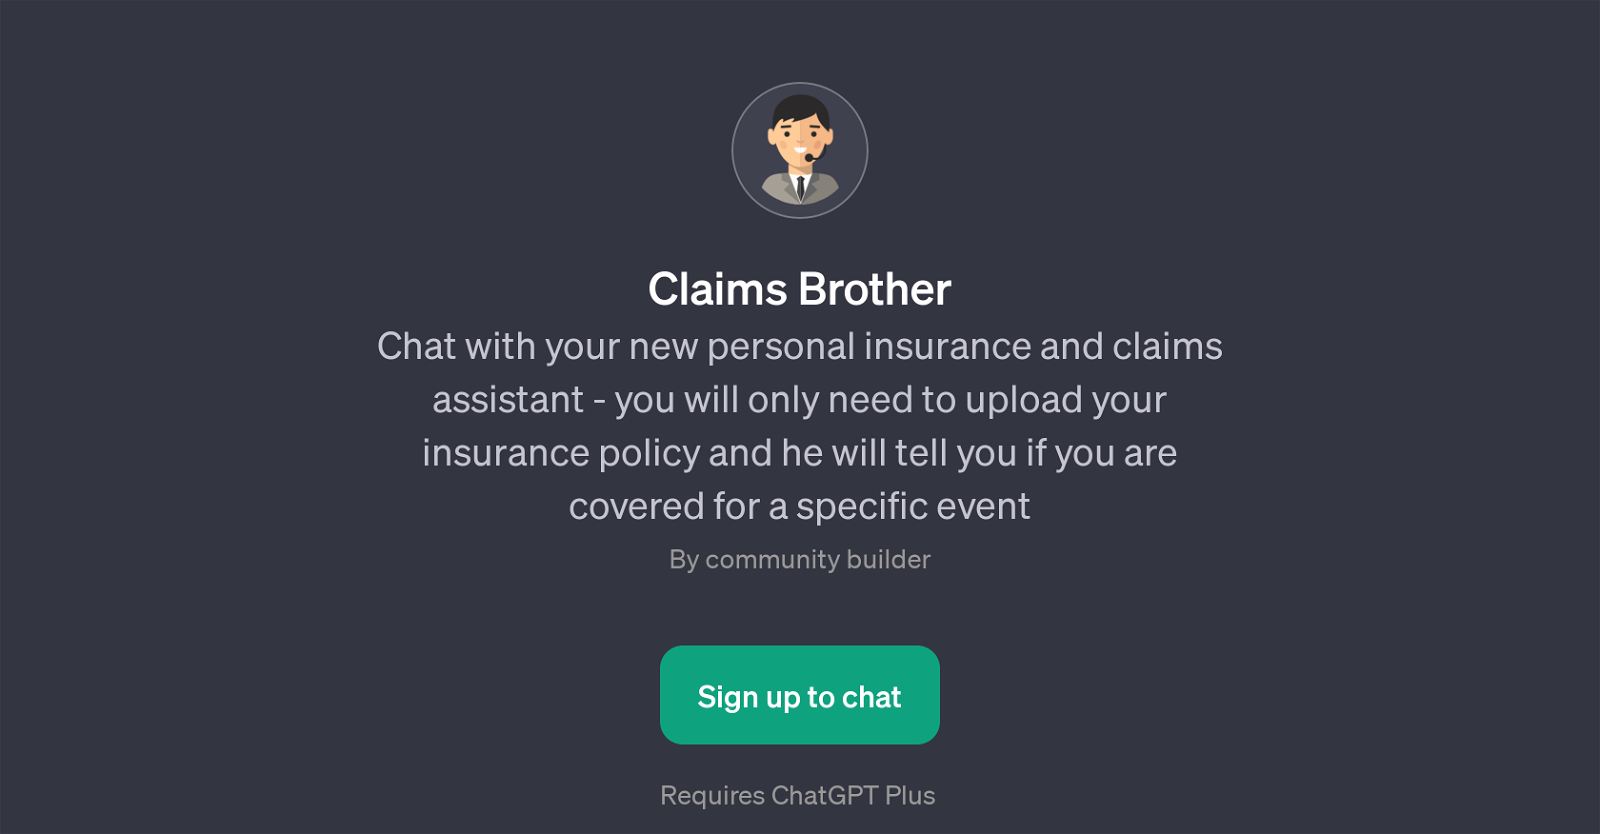 Claims Brother website